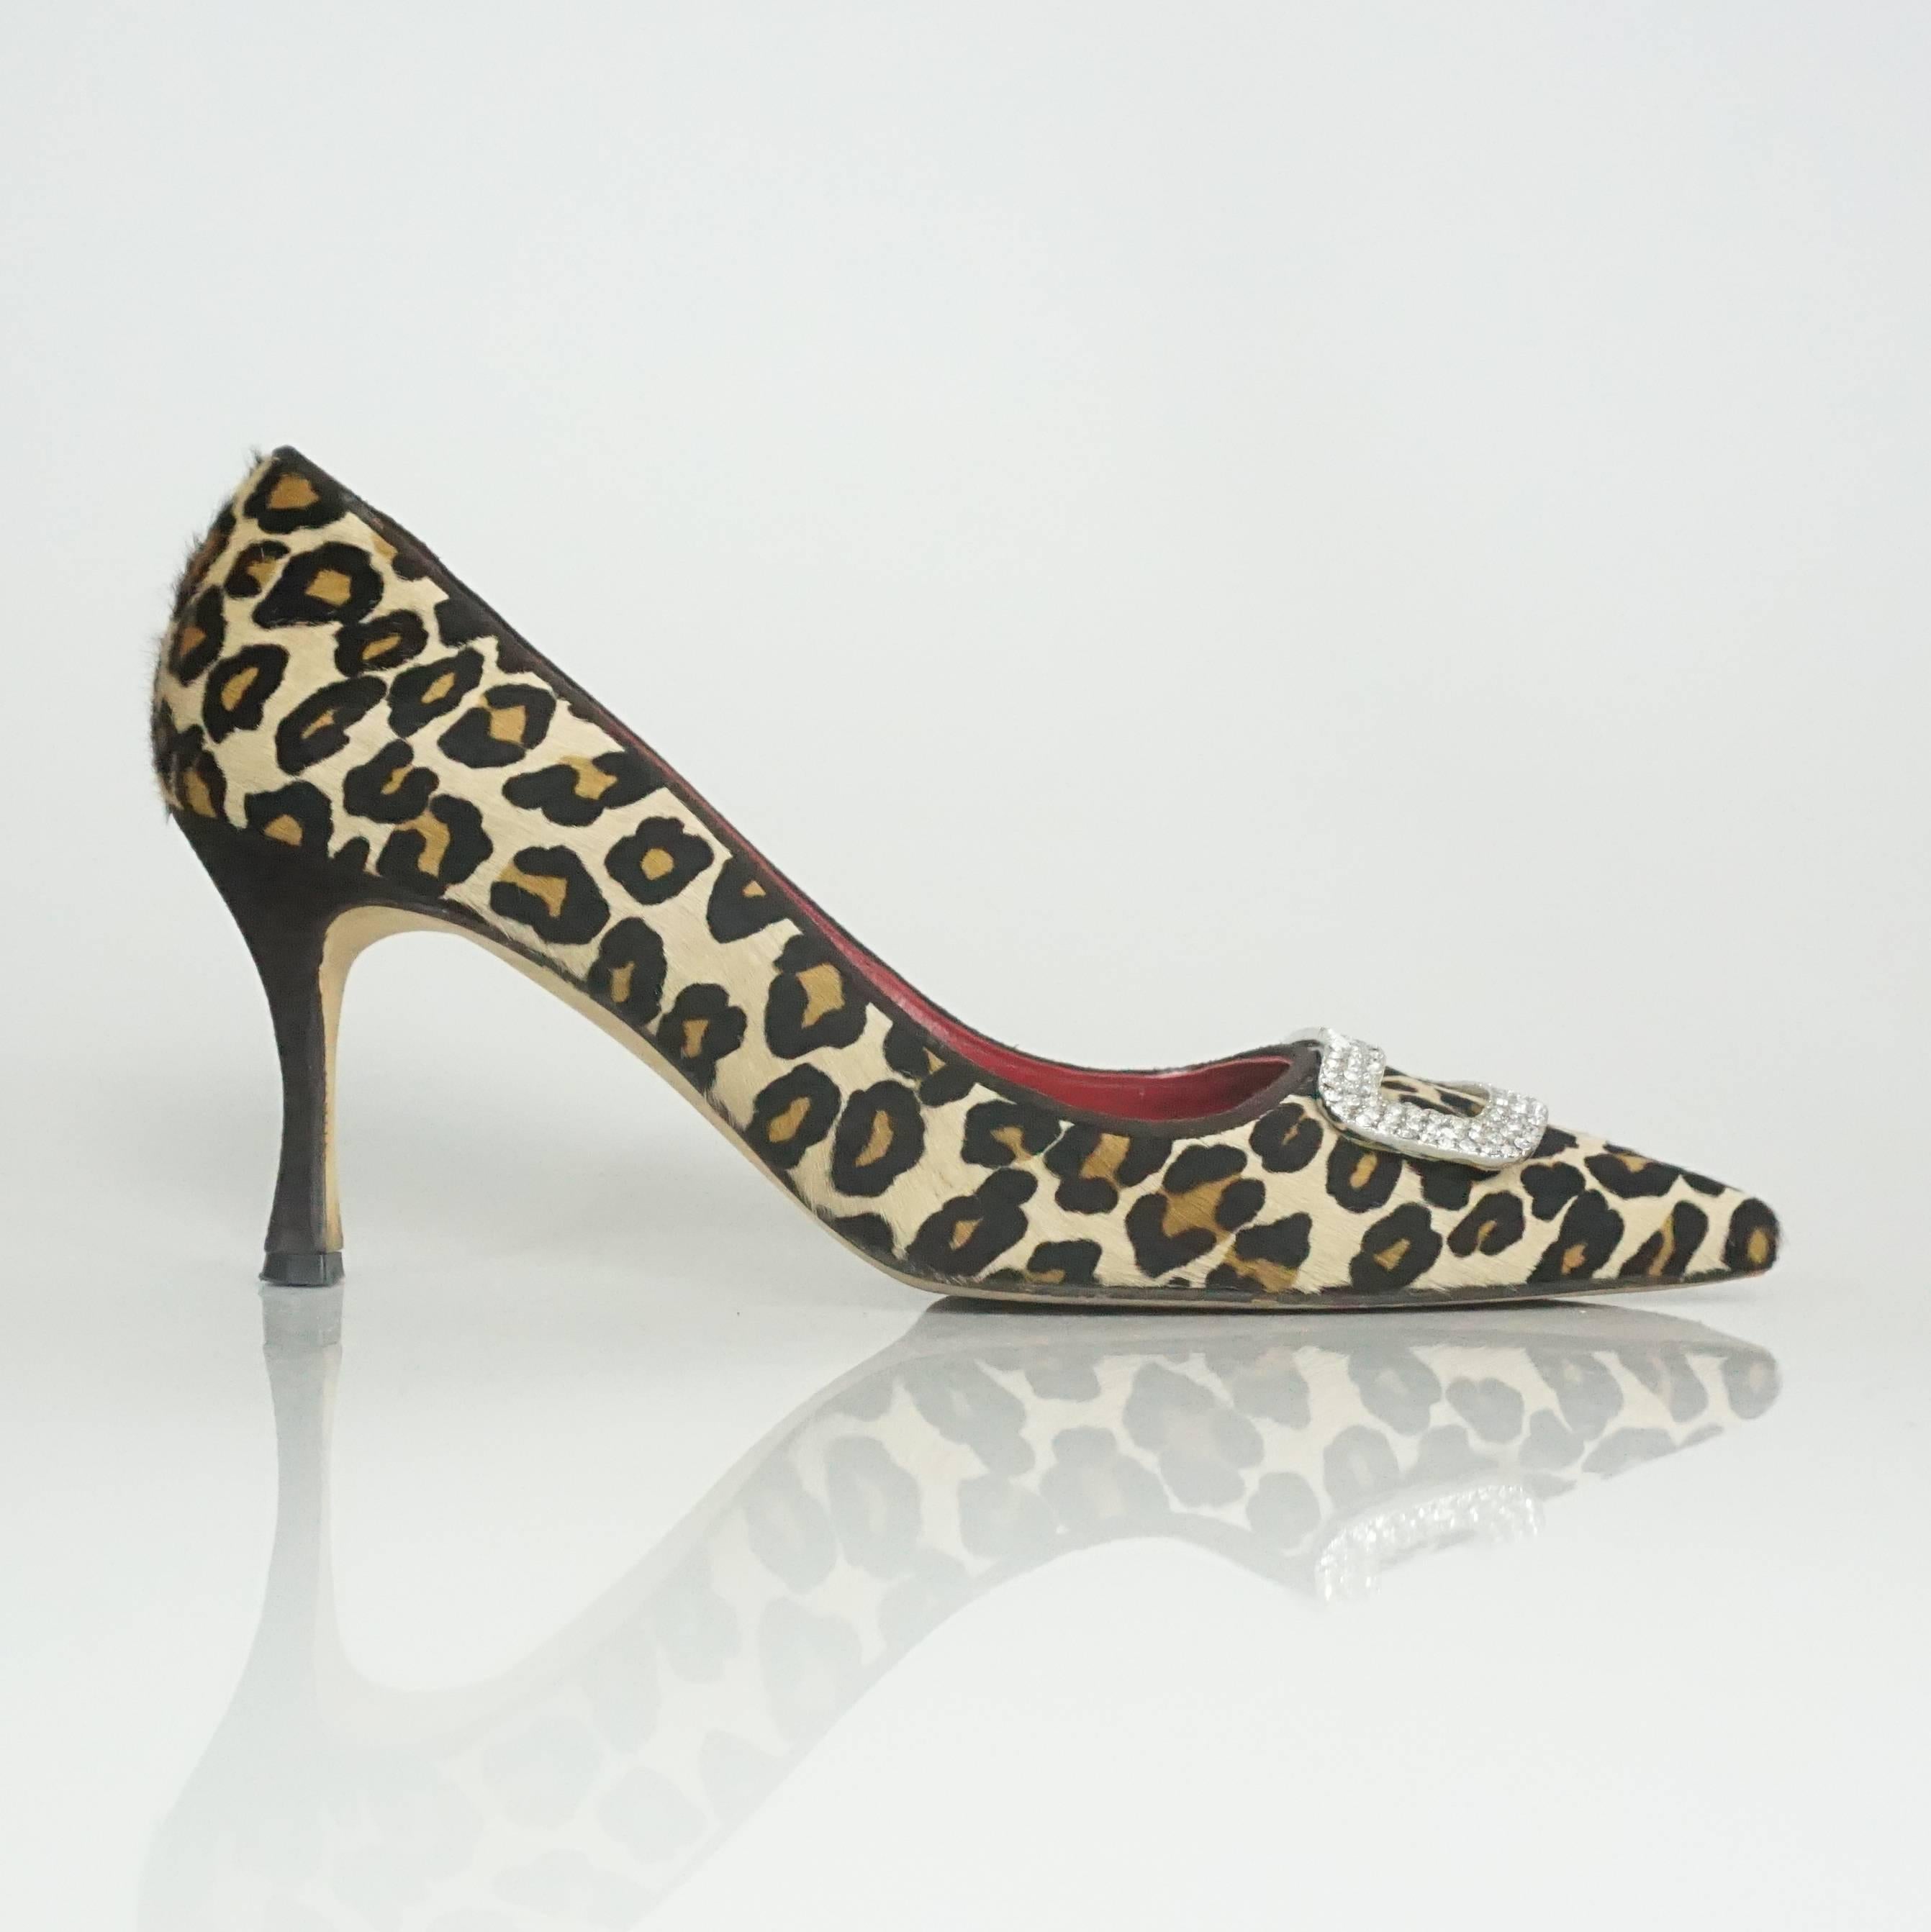 Manolo Blahnik Leopard Pony Hair Pump with Rhinestone Buckle - 40. These fun pumps are leopard printed pony hair. They are tan, light brown, and black in color with a large rhinestone buckle at the toe. The toe is pointed. They are in excellent